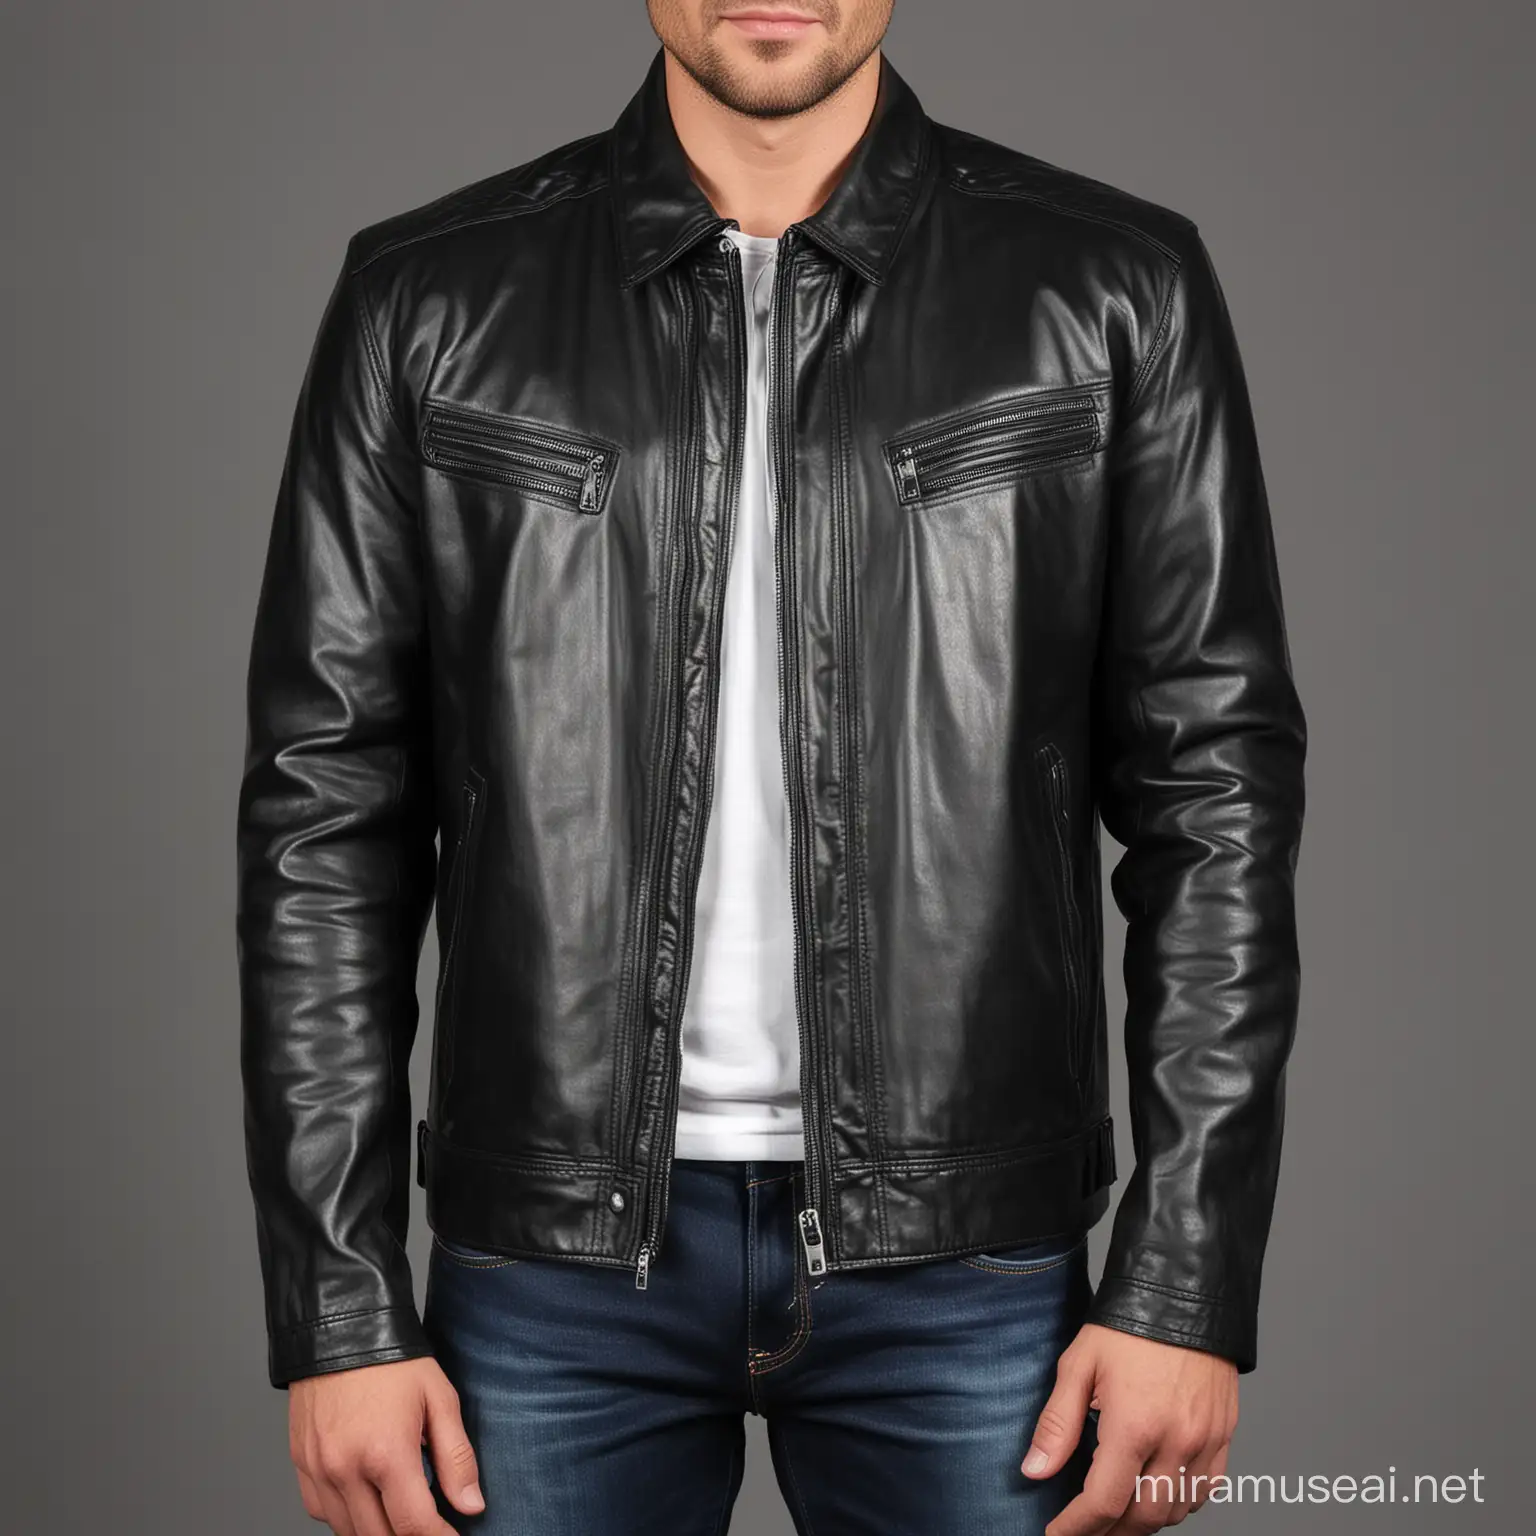 Stylish Mens Leather Jacket on White Background with Zipper Detail